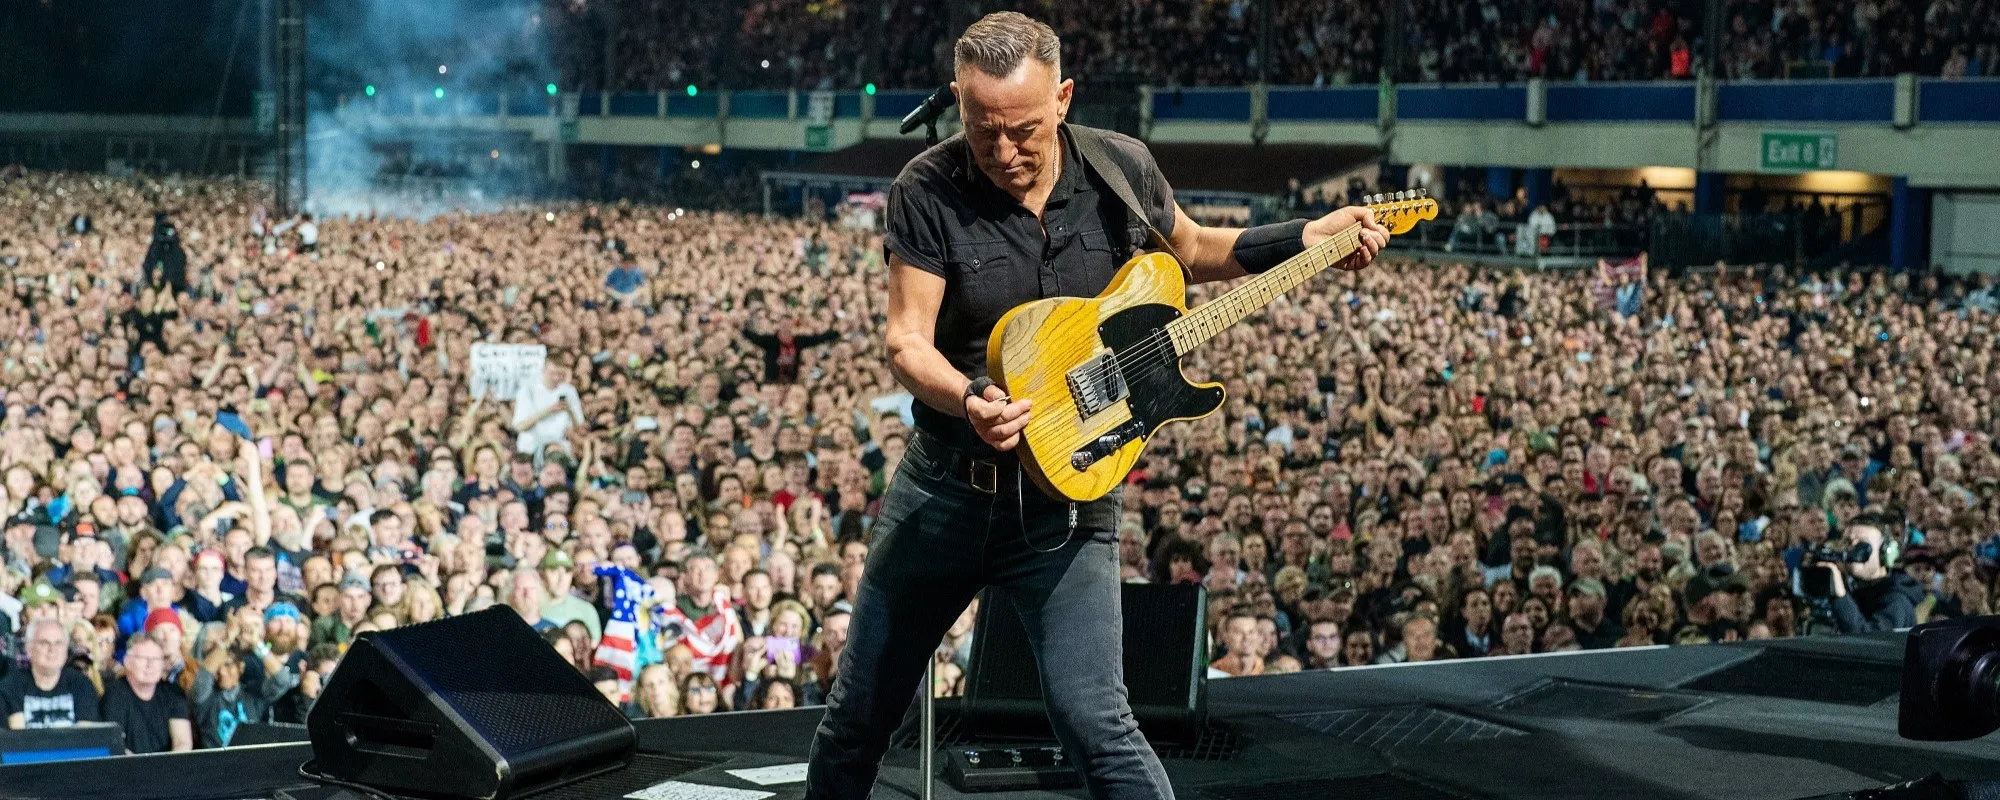 The Meaning Behind “The Promised Land” by Bruce Springsteen